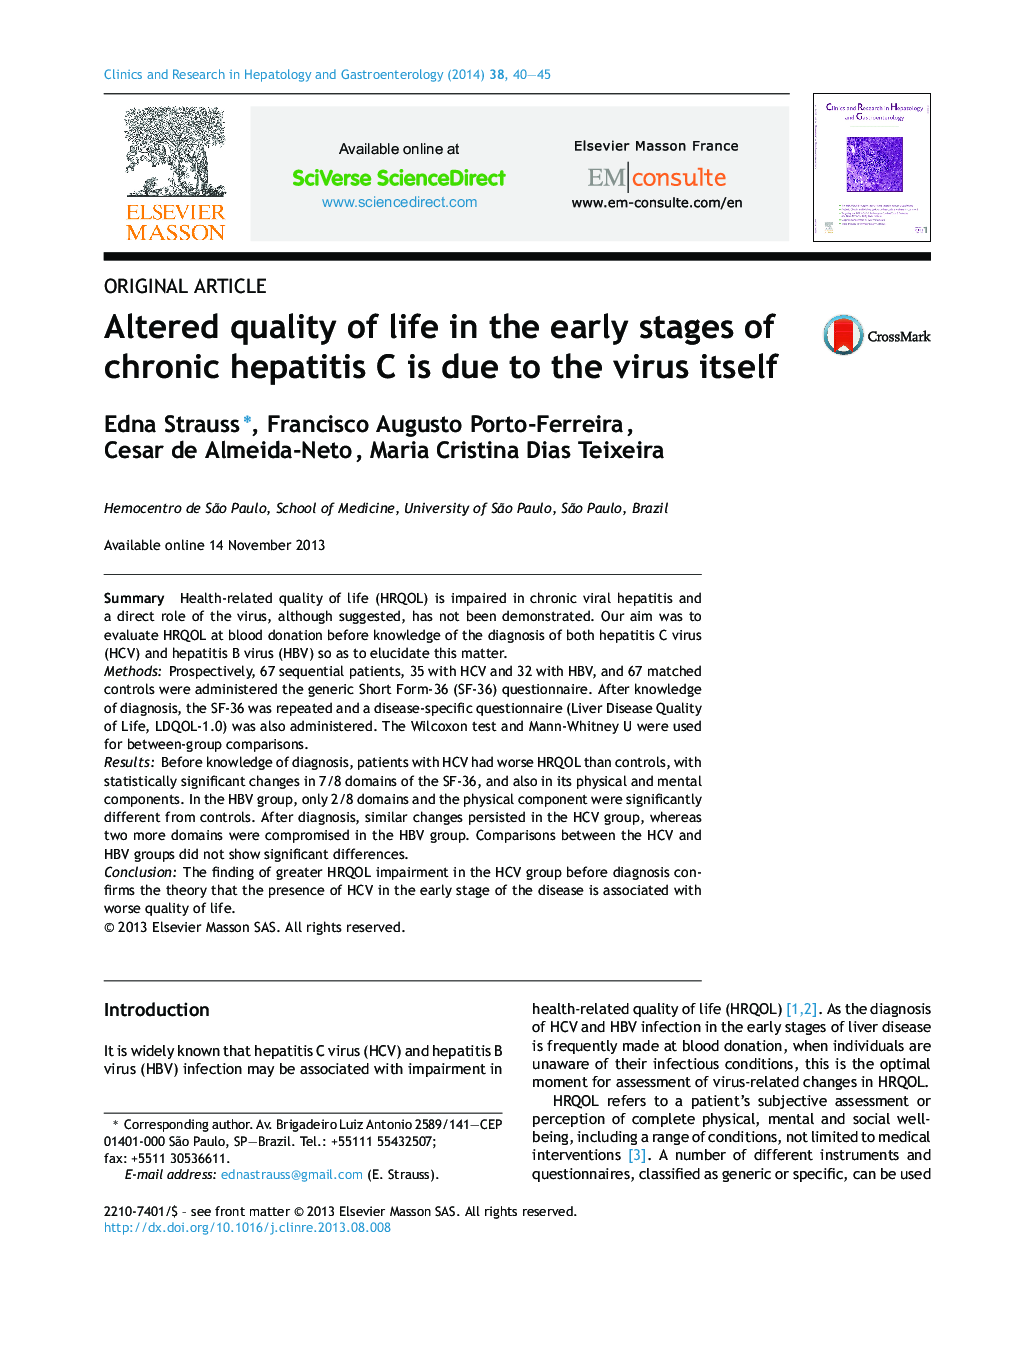 Altered quality of life in the early stages of chronic hepatitis C is due to the virus itself